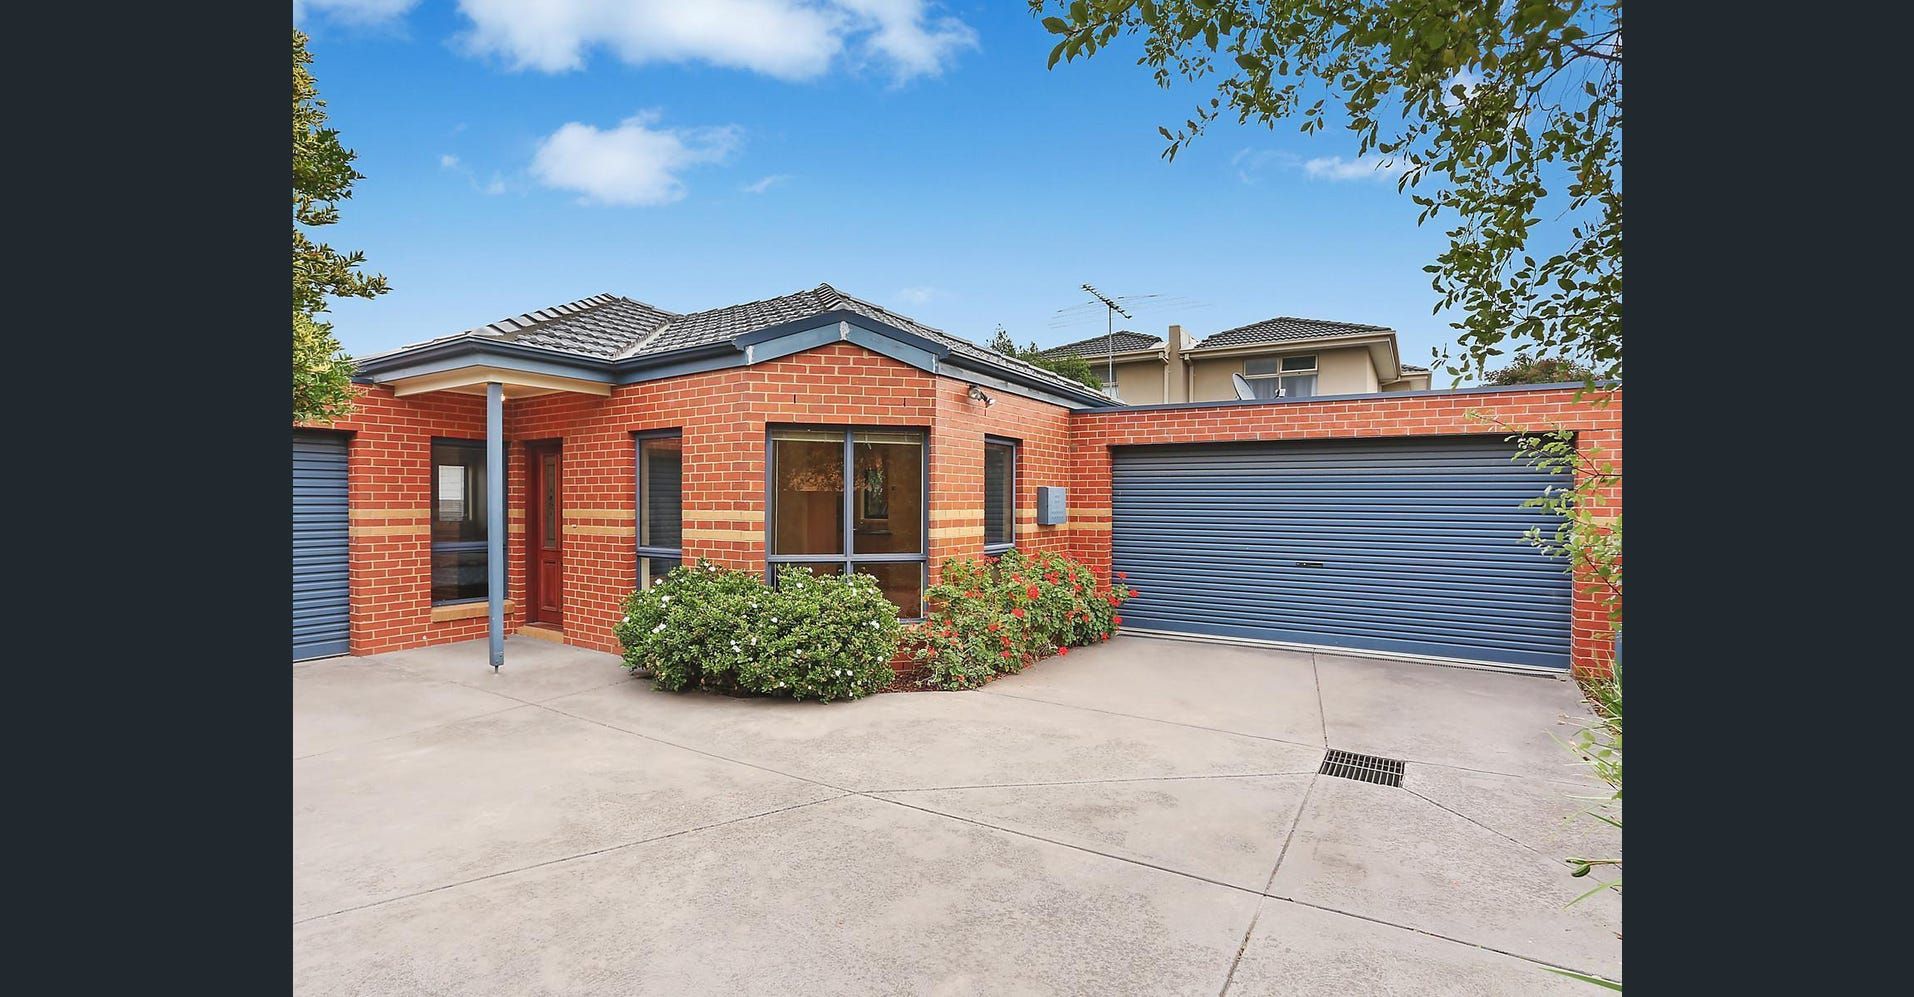 2 bedrooms House in 2/24 Barry Street BURWOOD EAST VIC, 3151